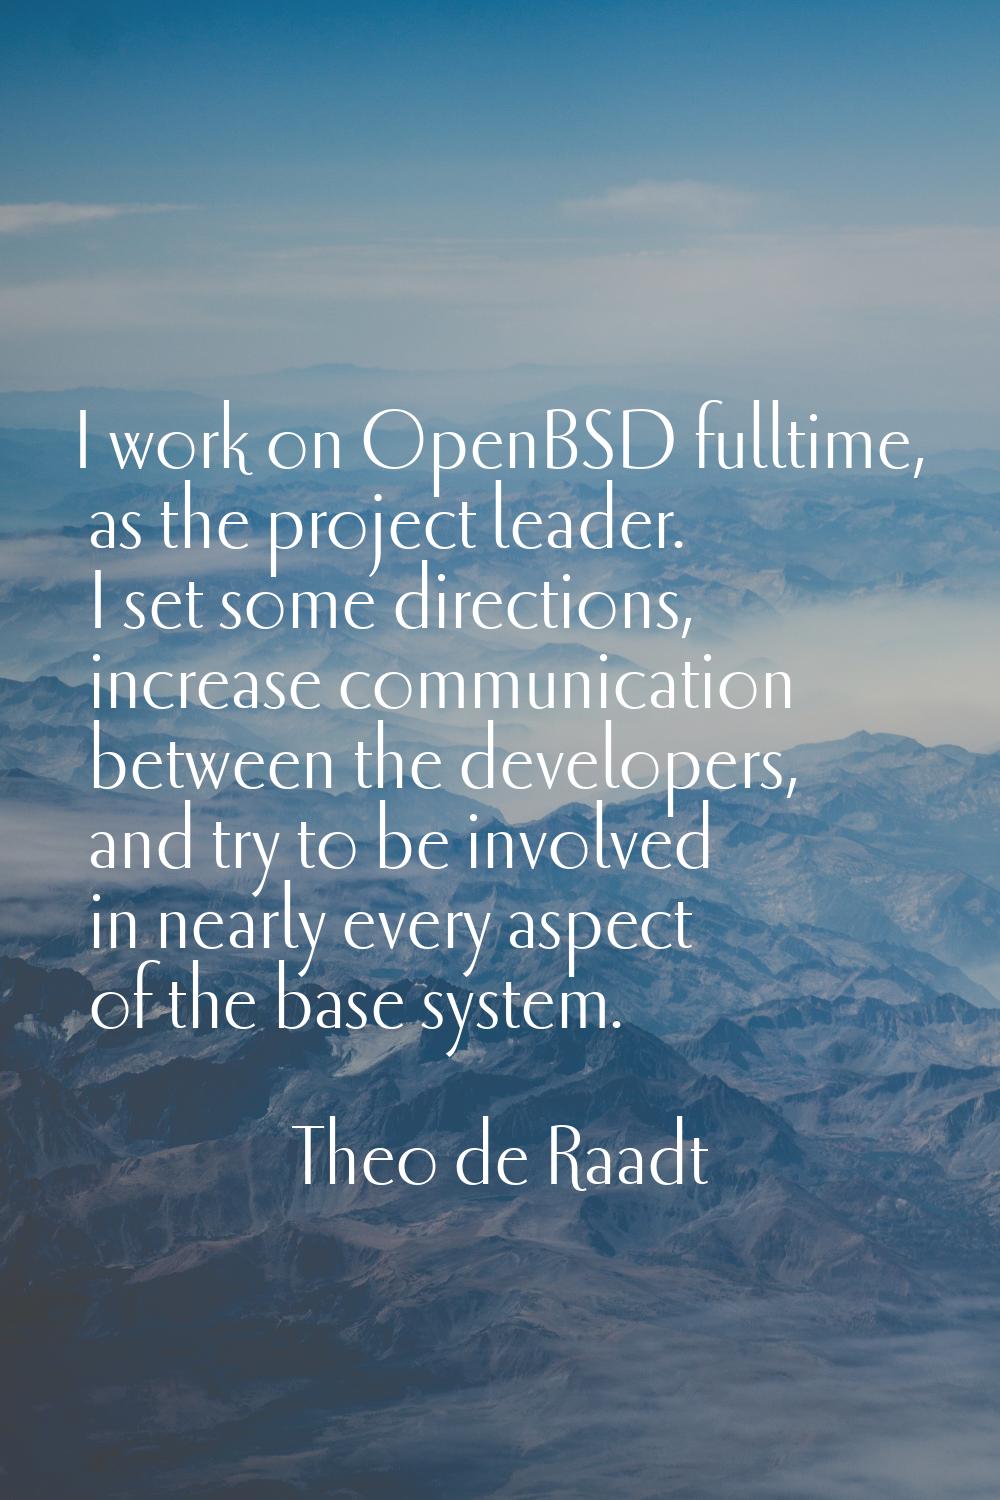 I work on OpenBSD fulltime, as the project leader. I set some directions, increase communication be